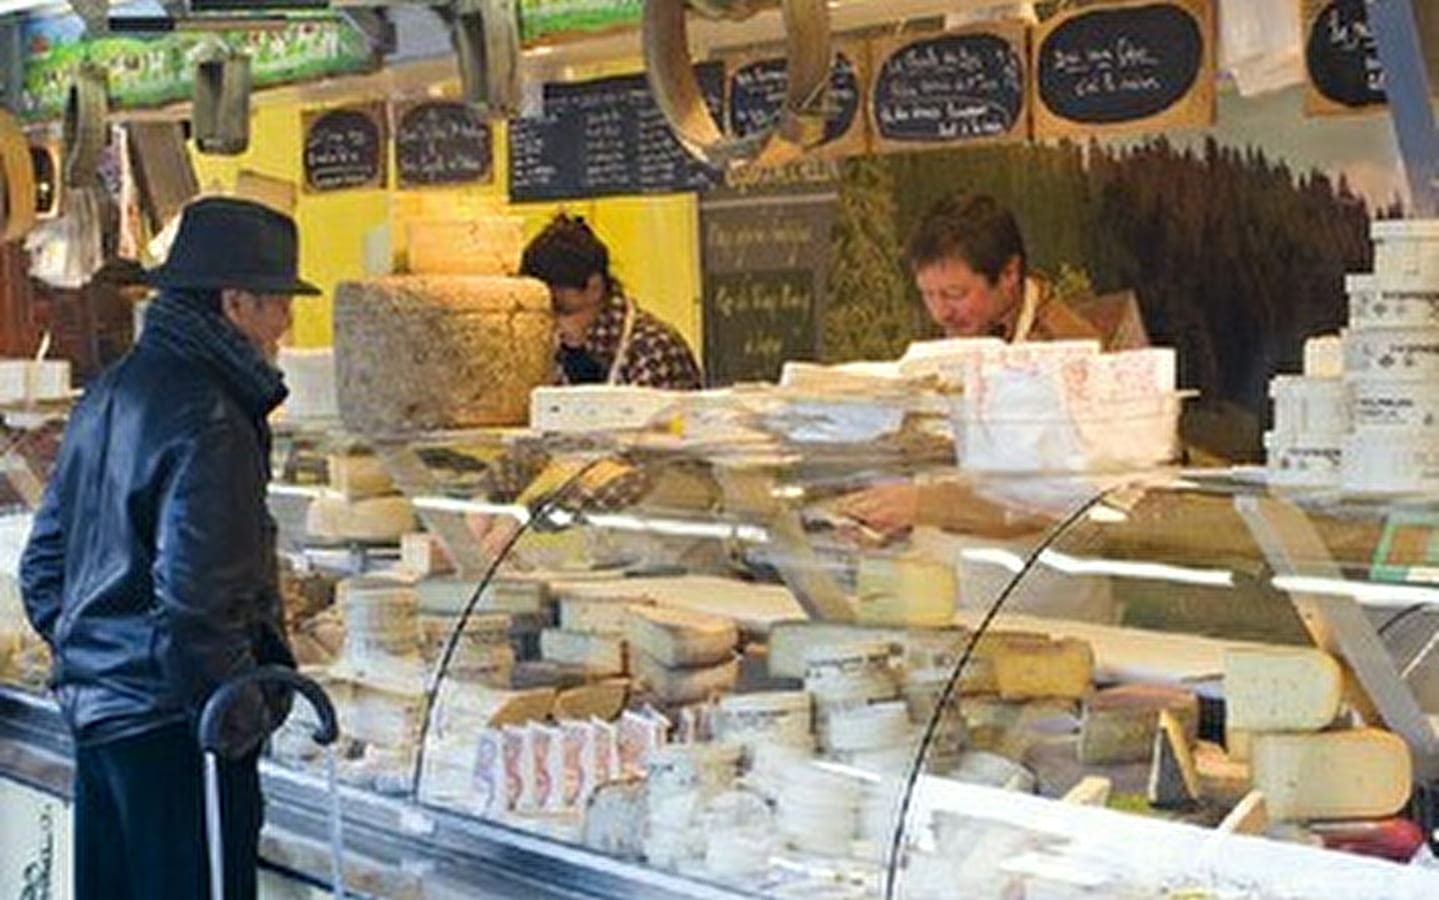 Fromagerie Michelin